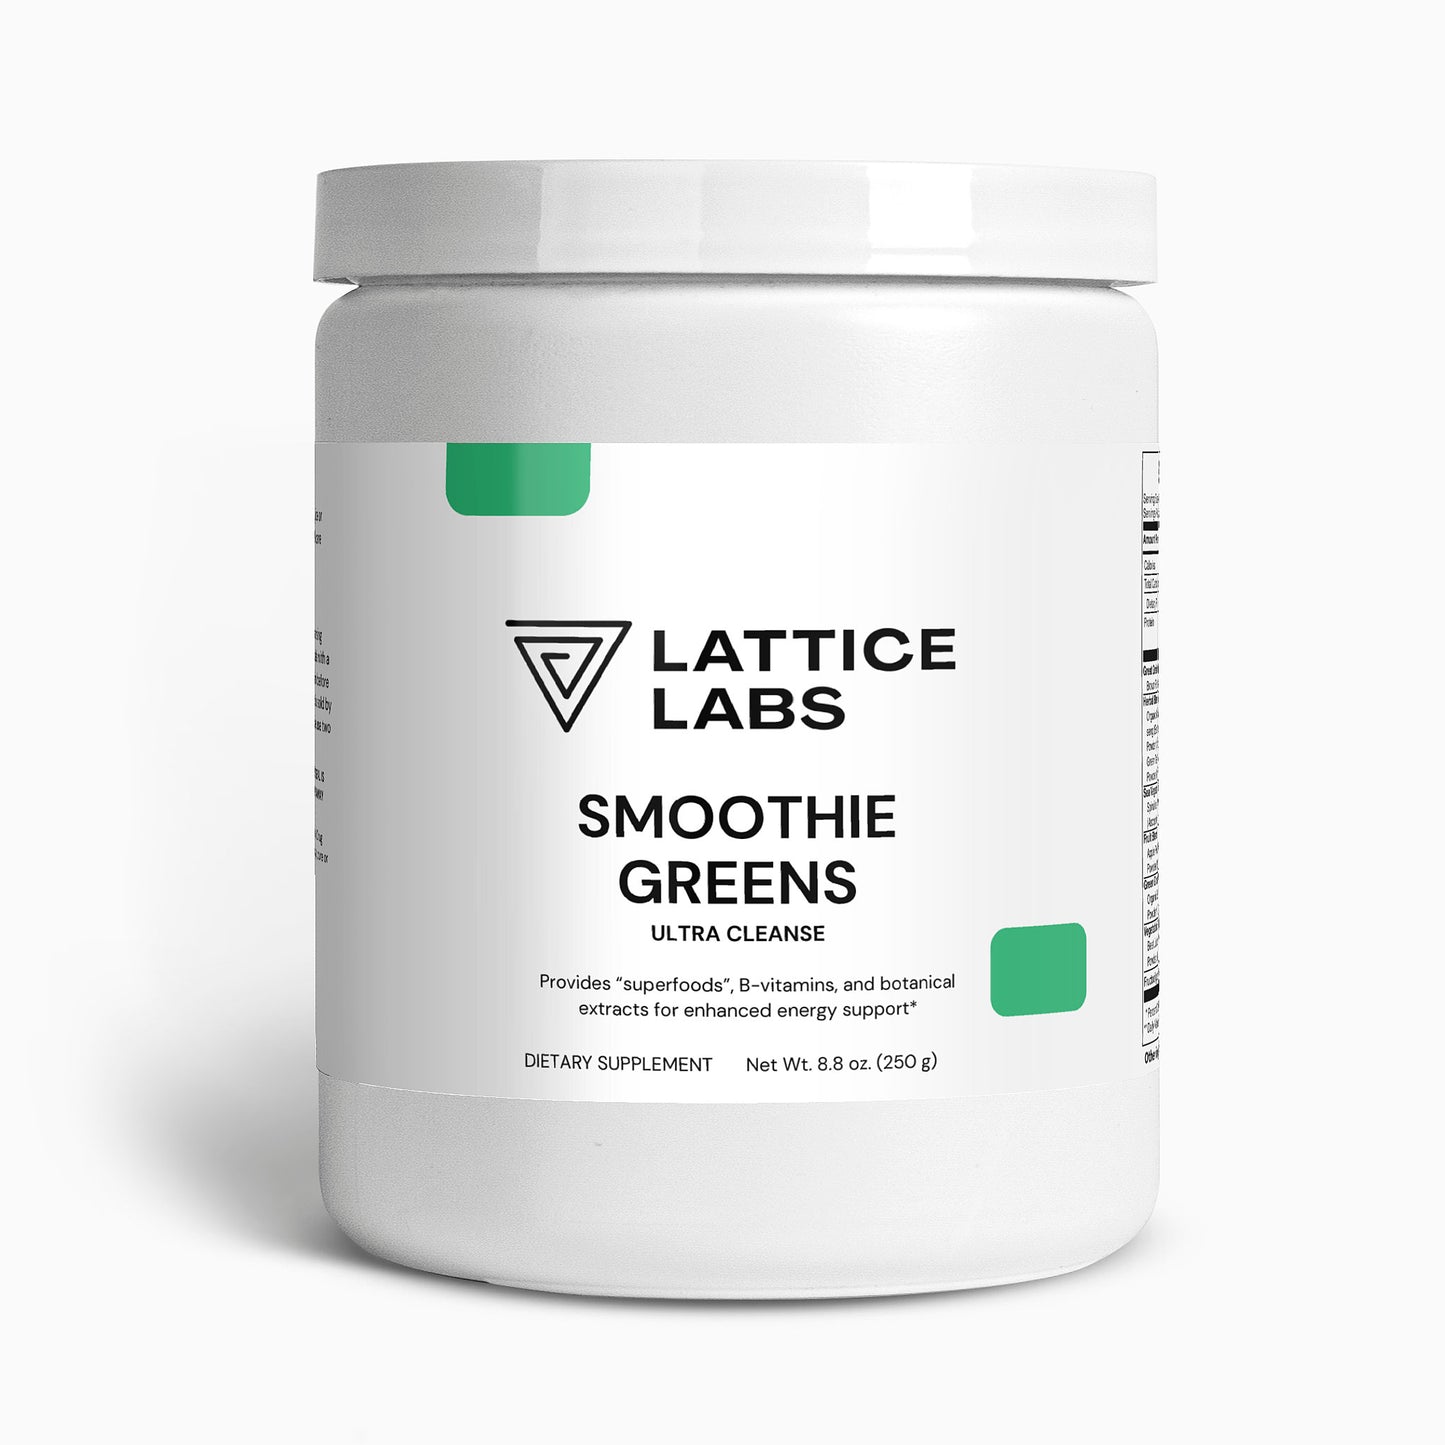 Lattice Labs Ultra Cleanse Smoothie Greens